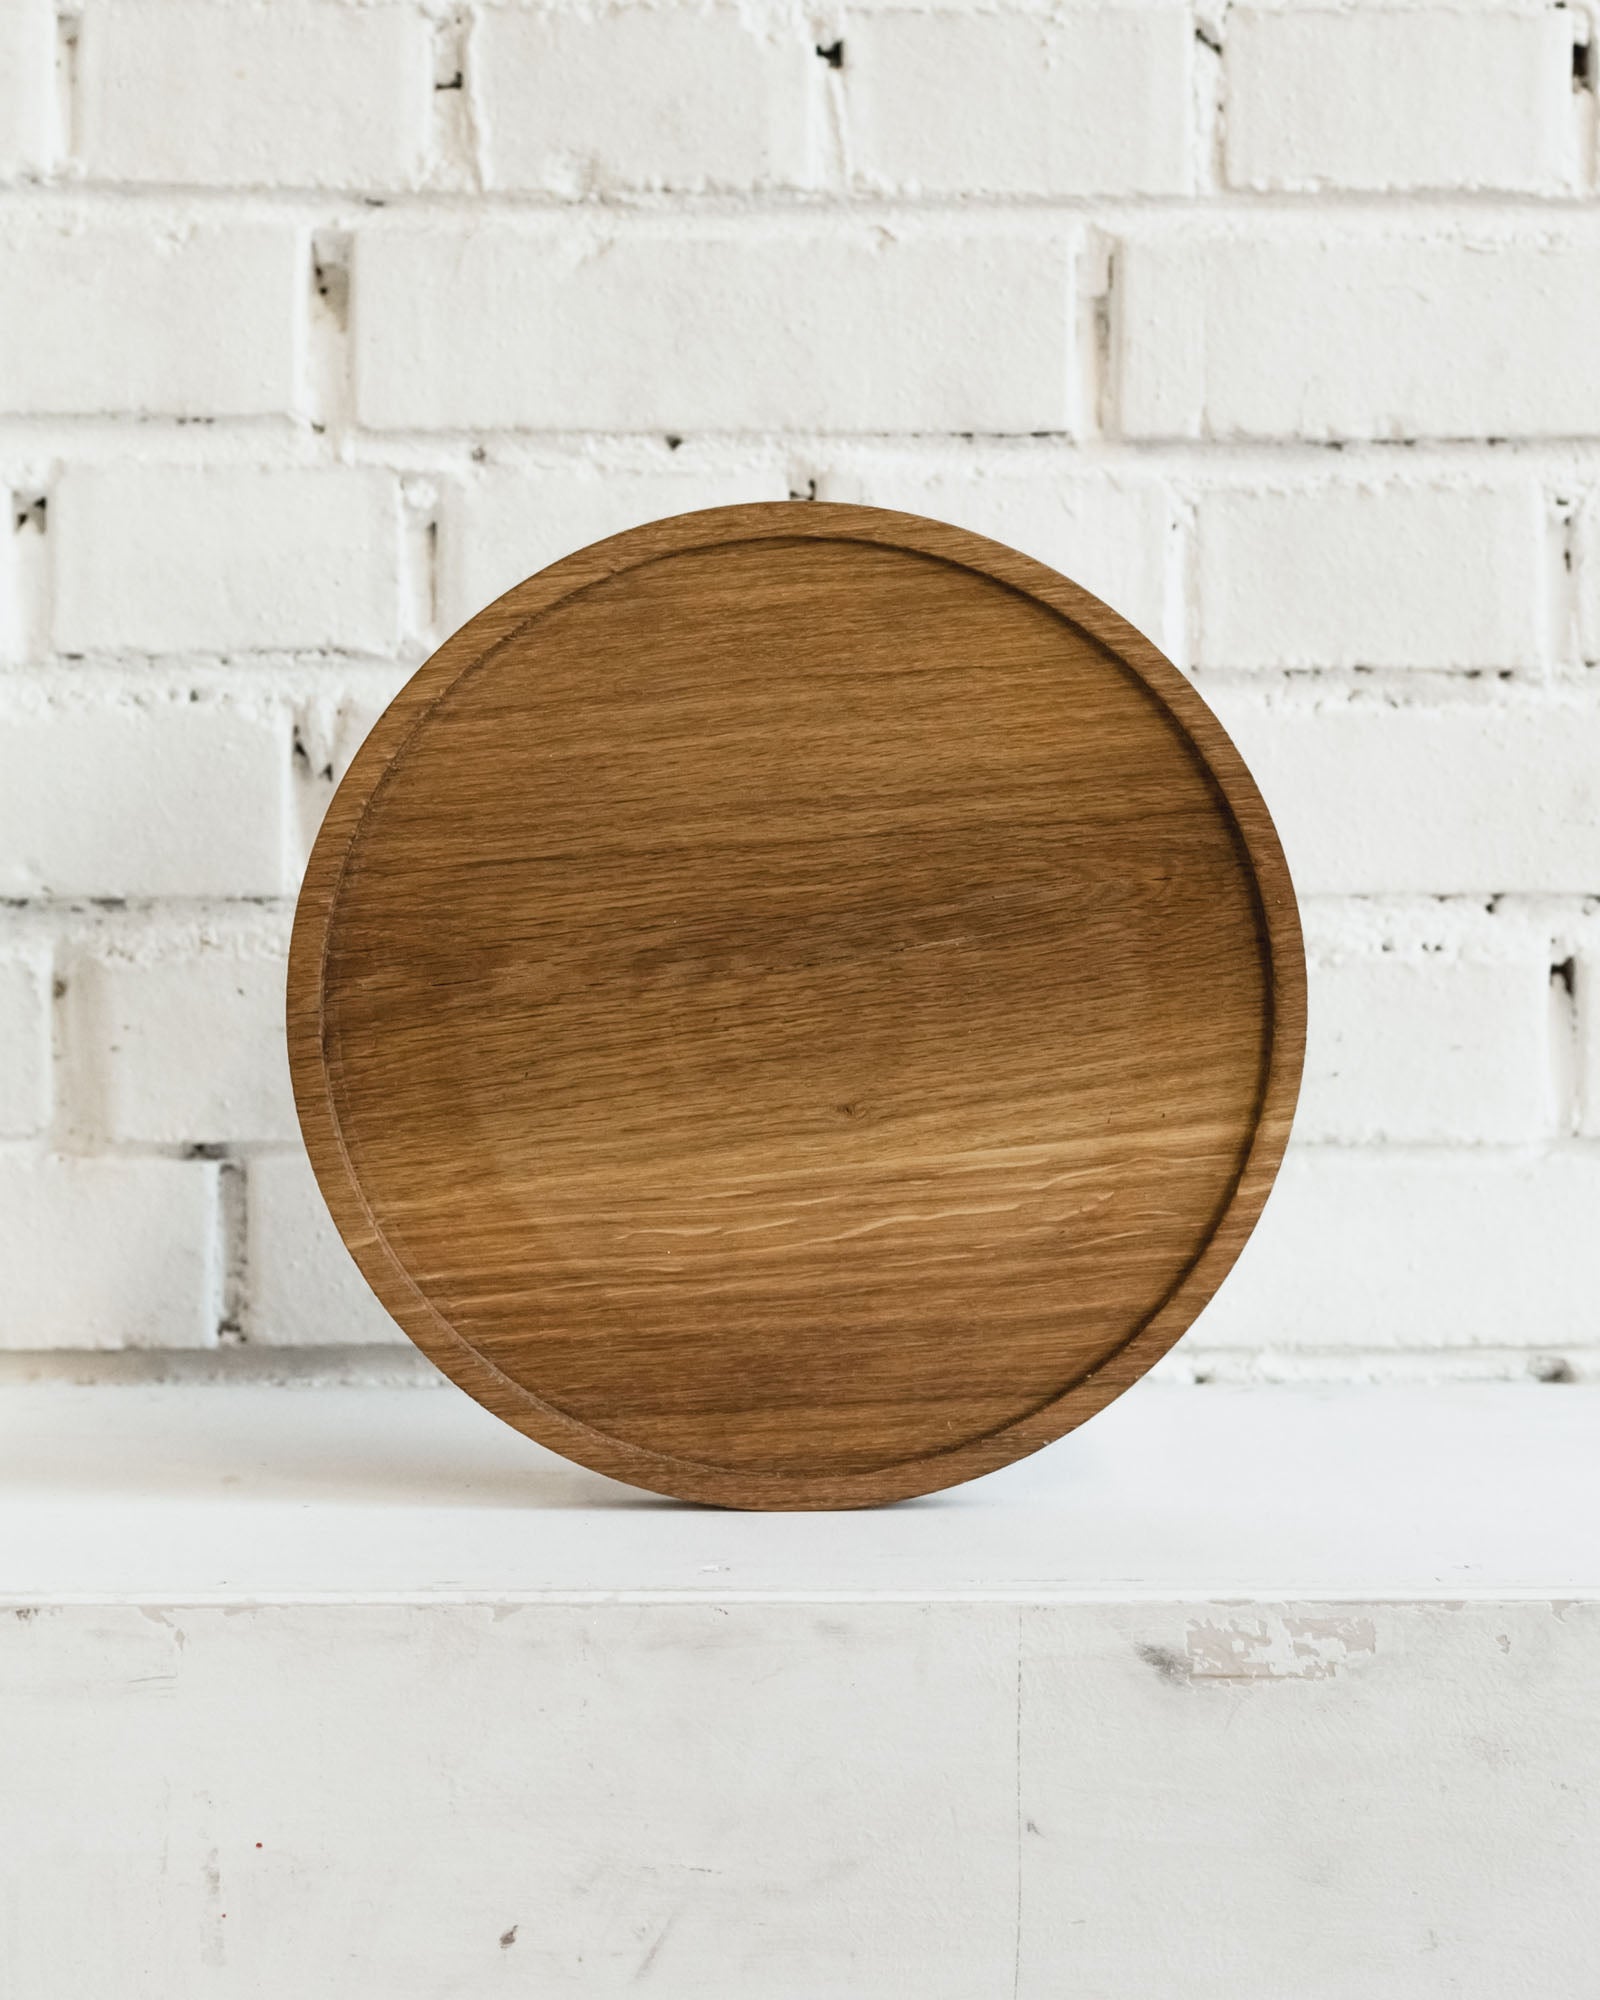 Fuga Large Round Oak Serving Board with Recessed Center 30cm diameter